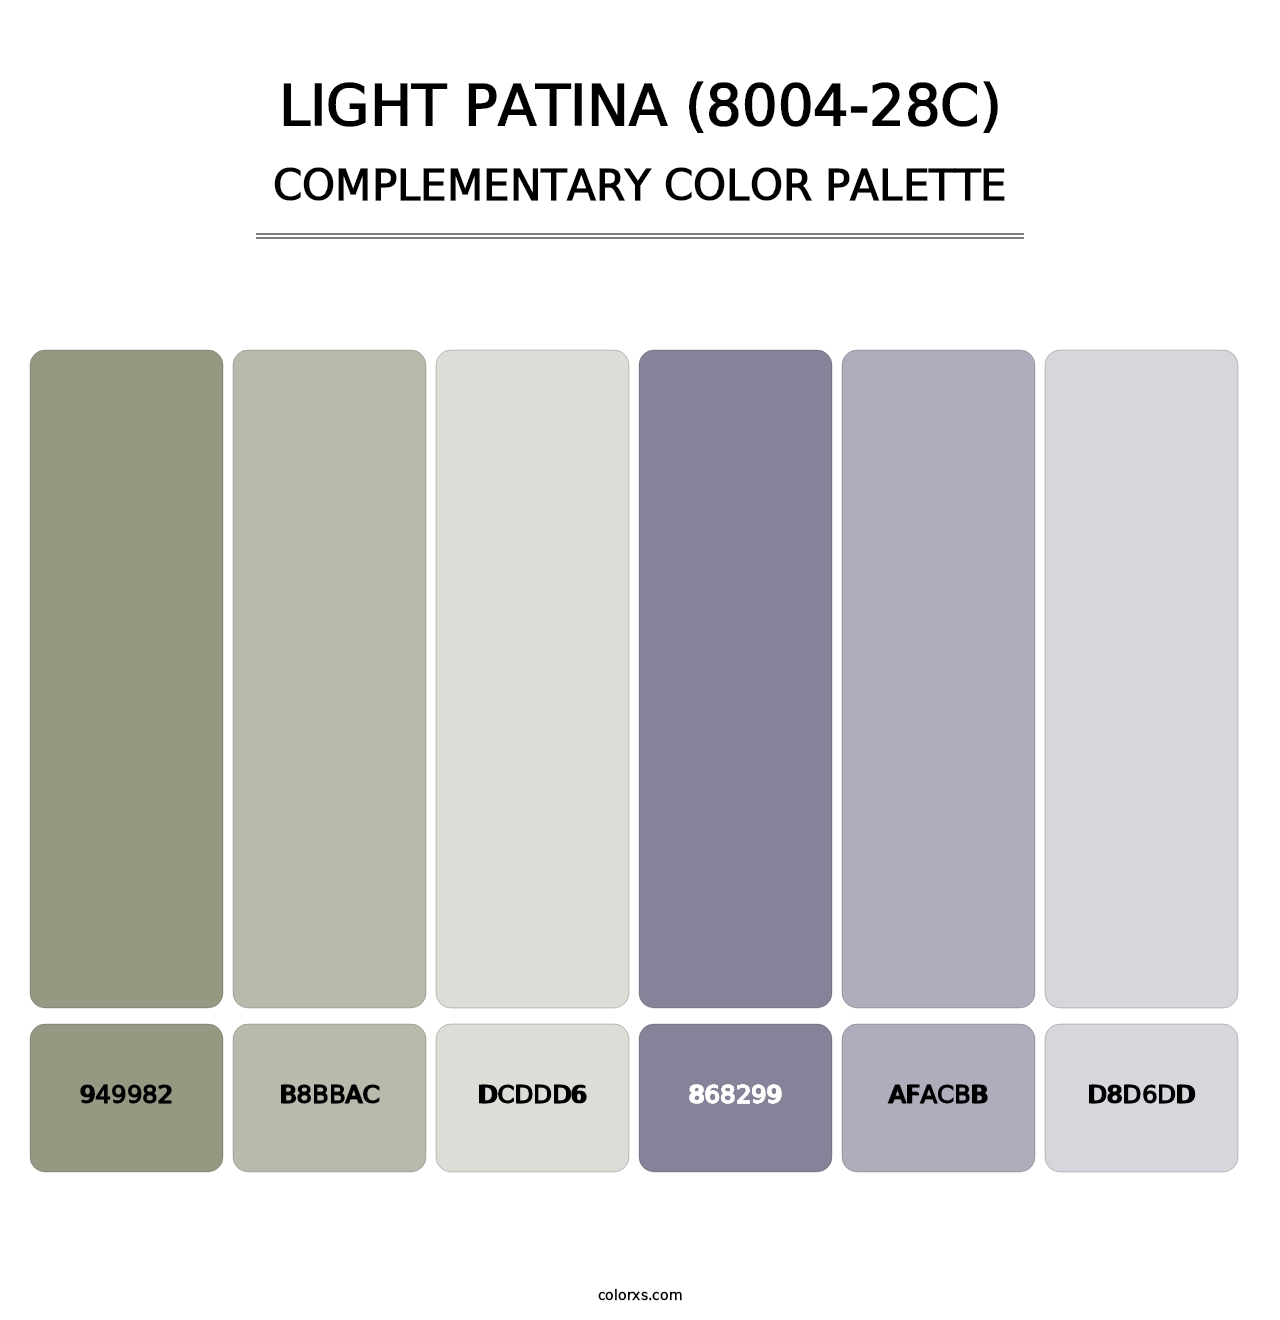 Light Patina (8004-28C) - Complementary Color Palette